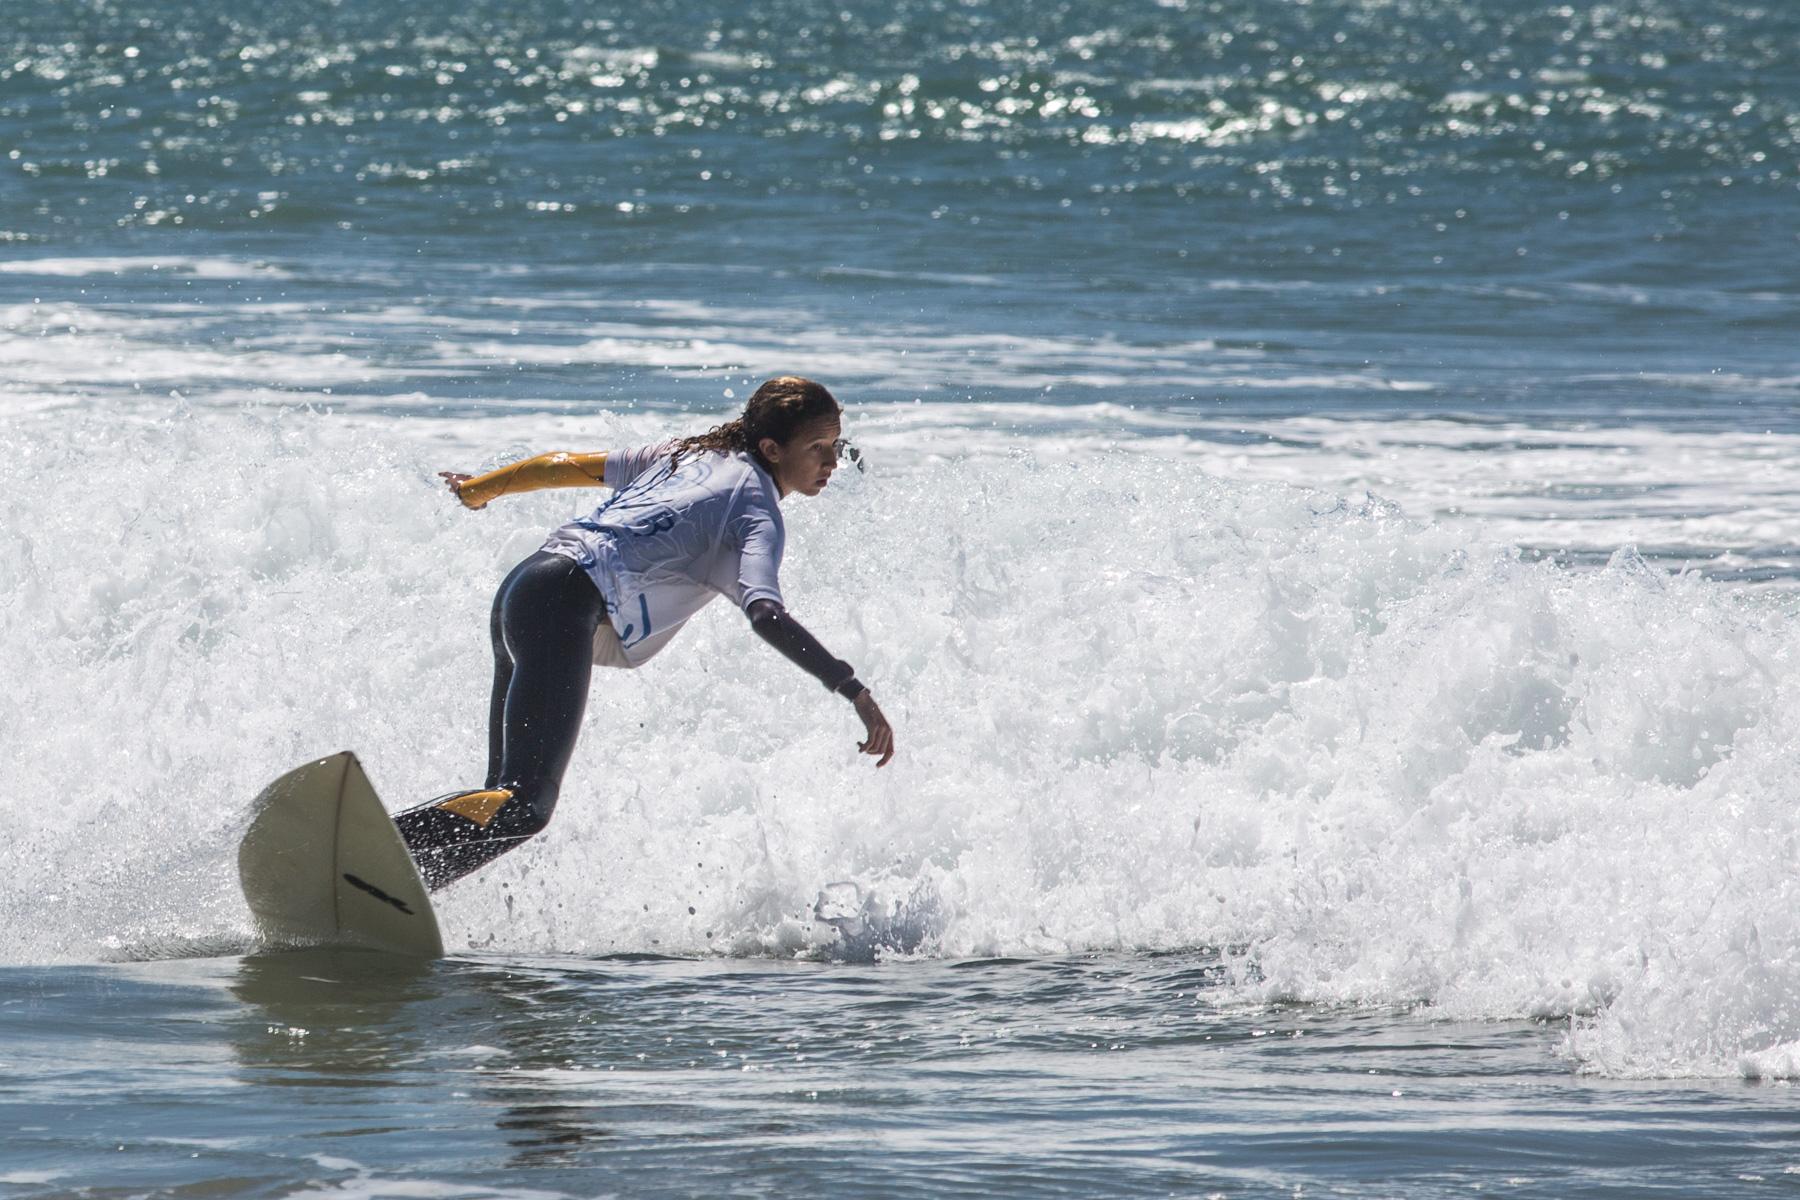 Lilias Tebbaï 12 is a rising talent. Here she rides the surf in Morocco.